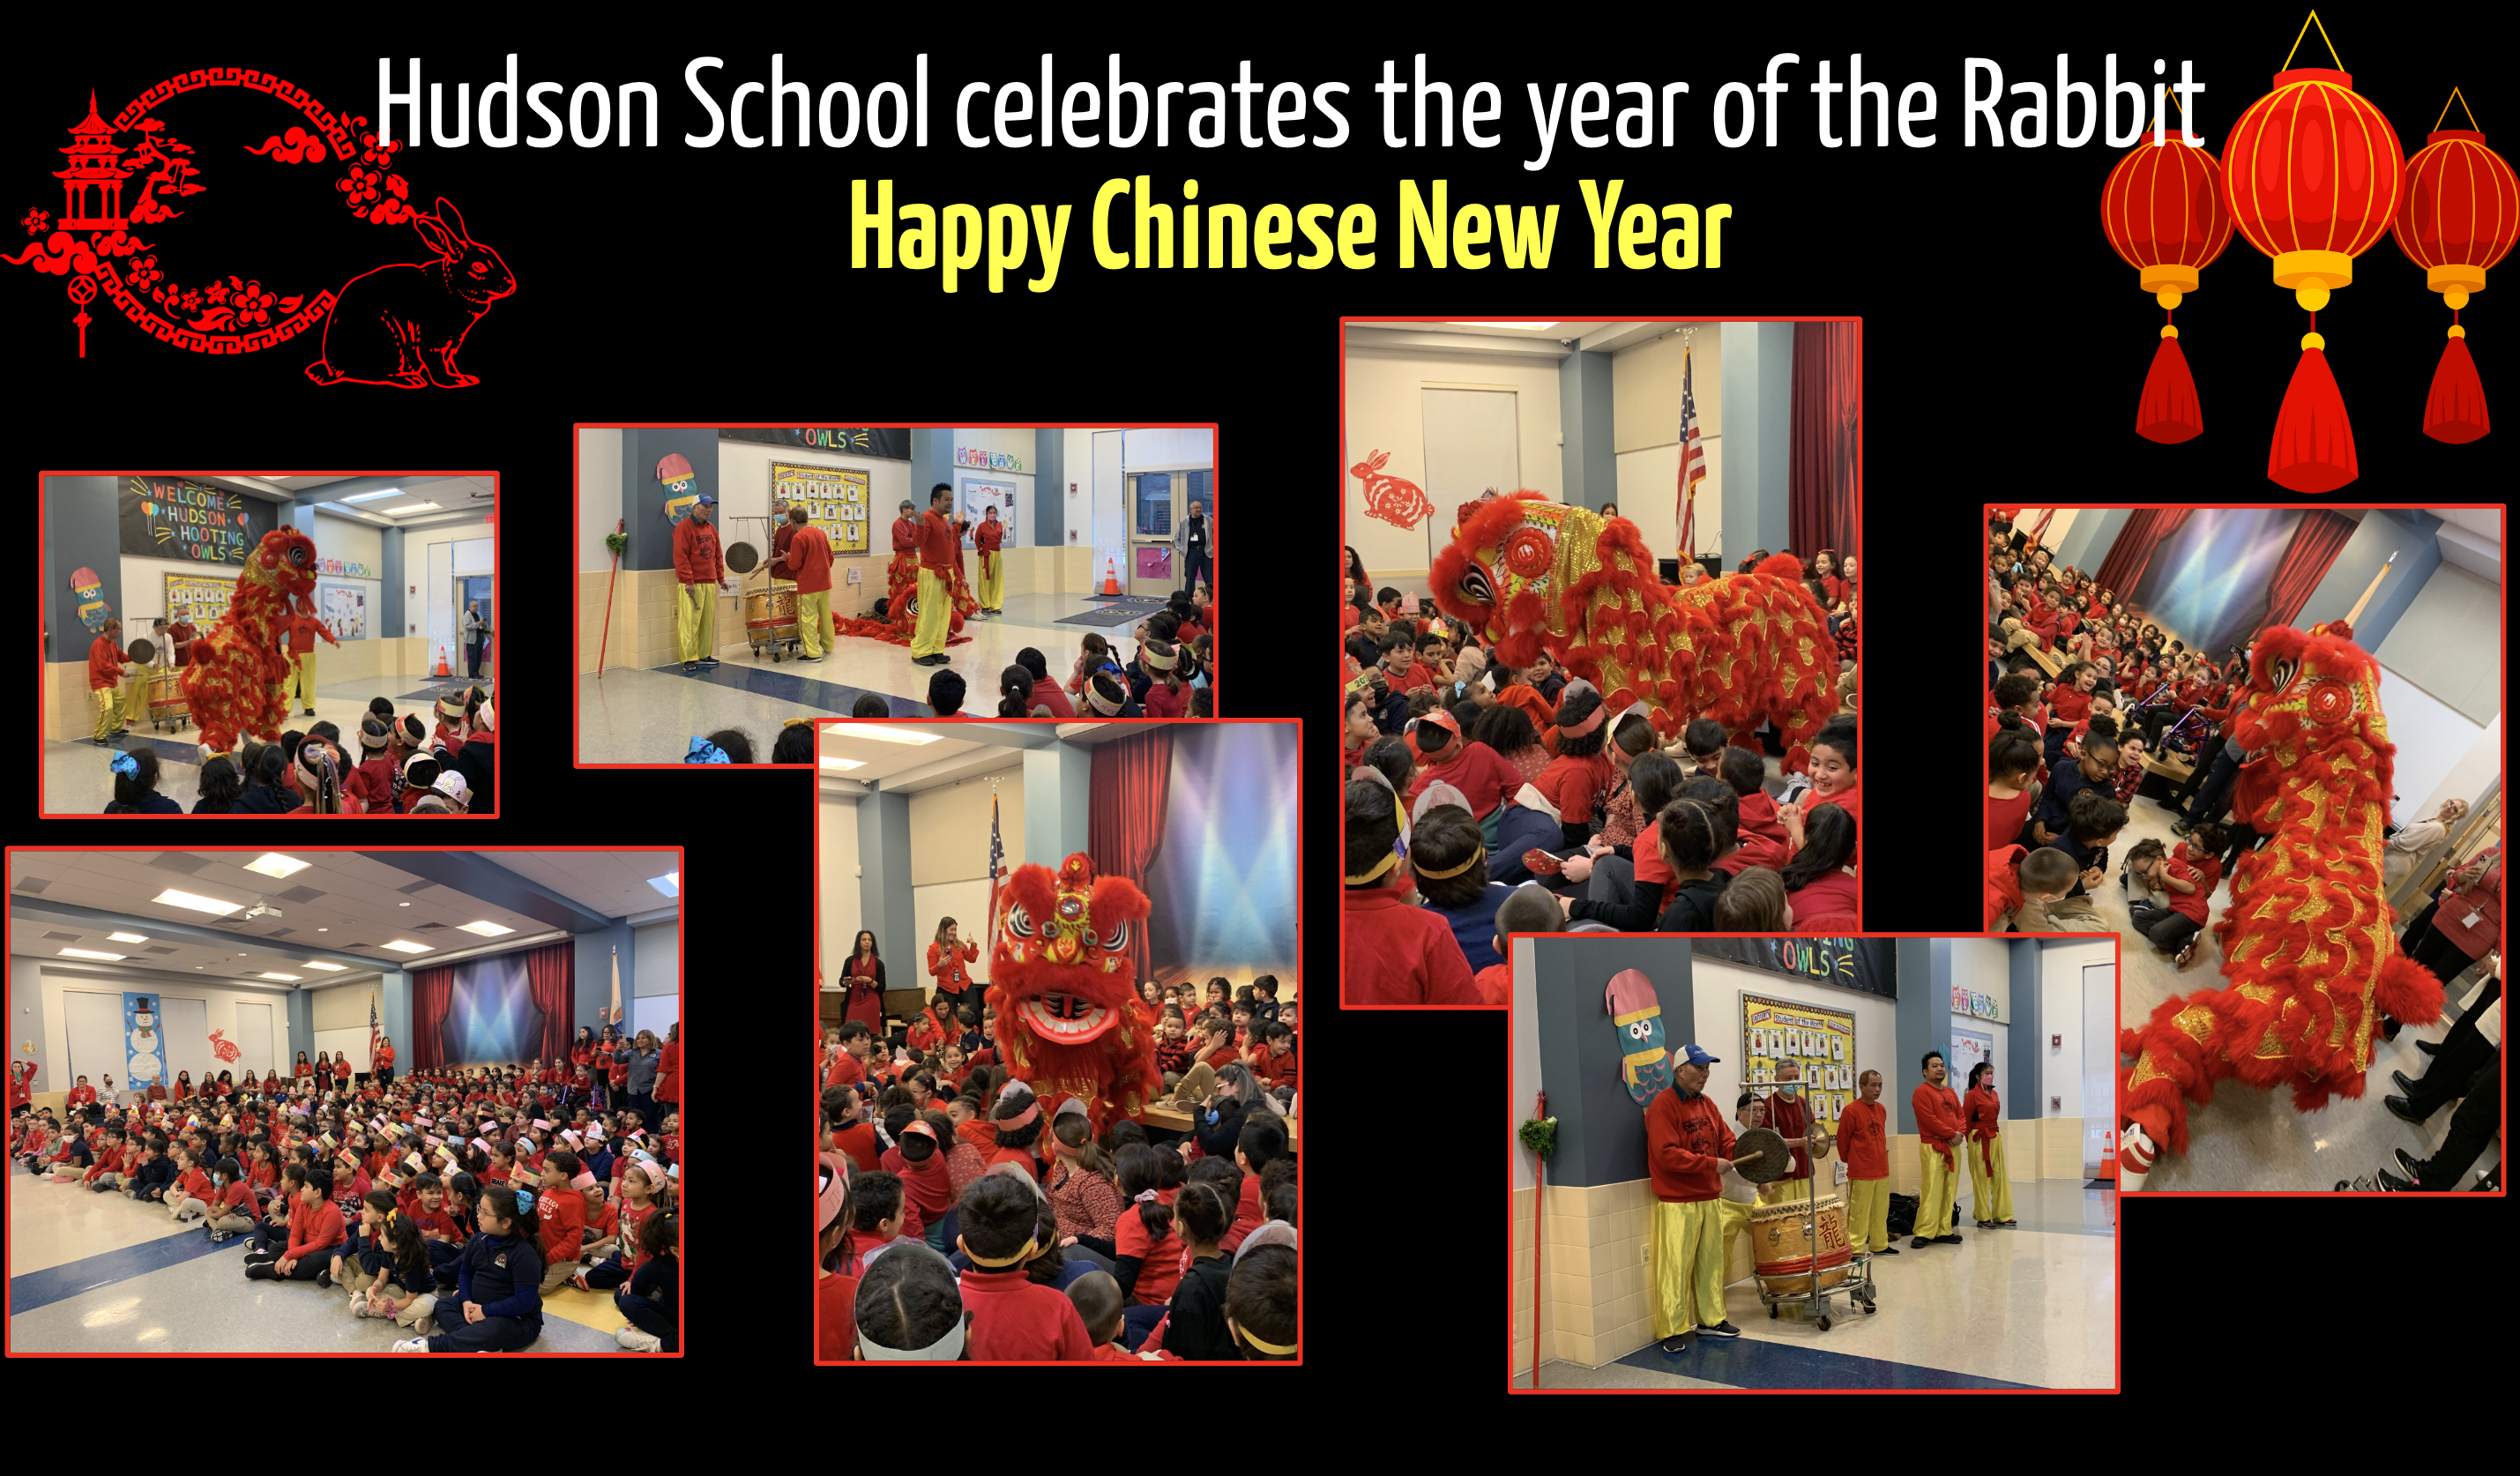 Celebrating the Chinese New Year at the Hudson School